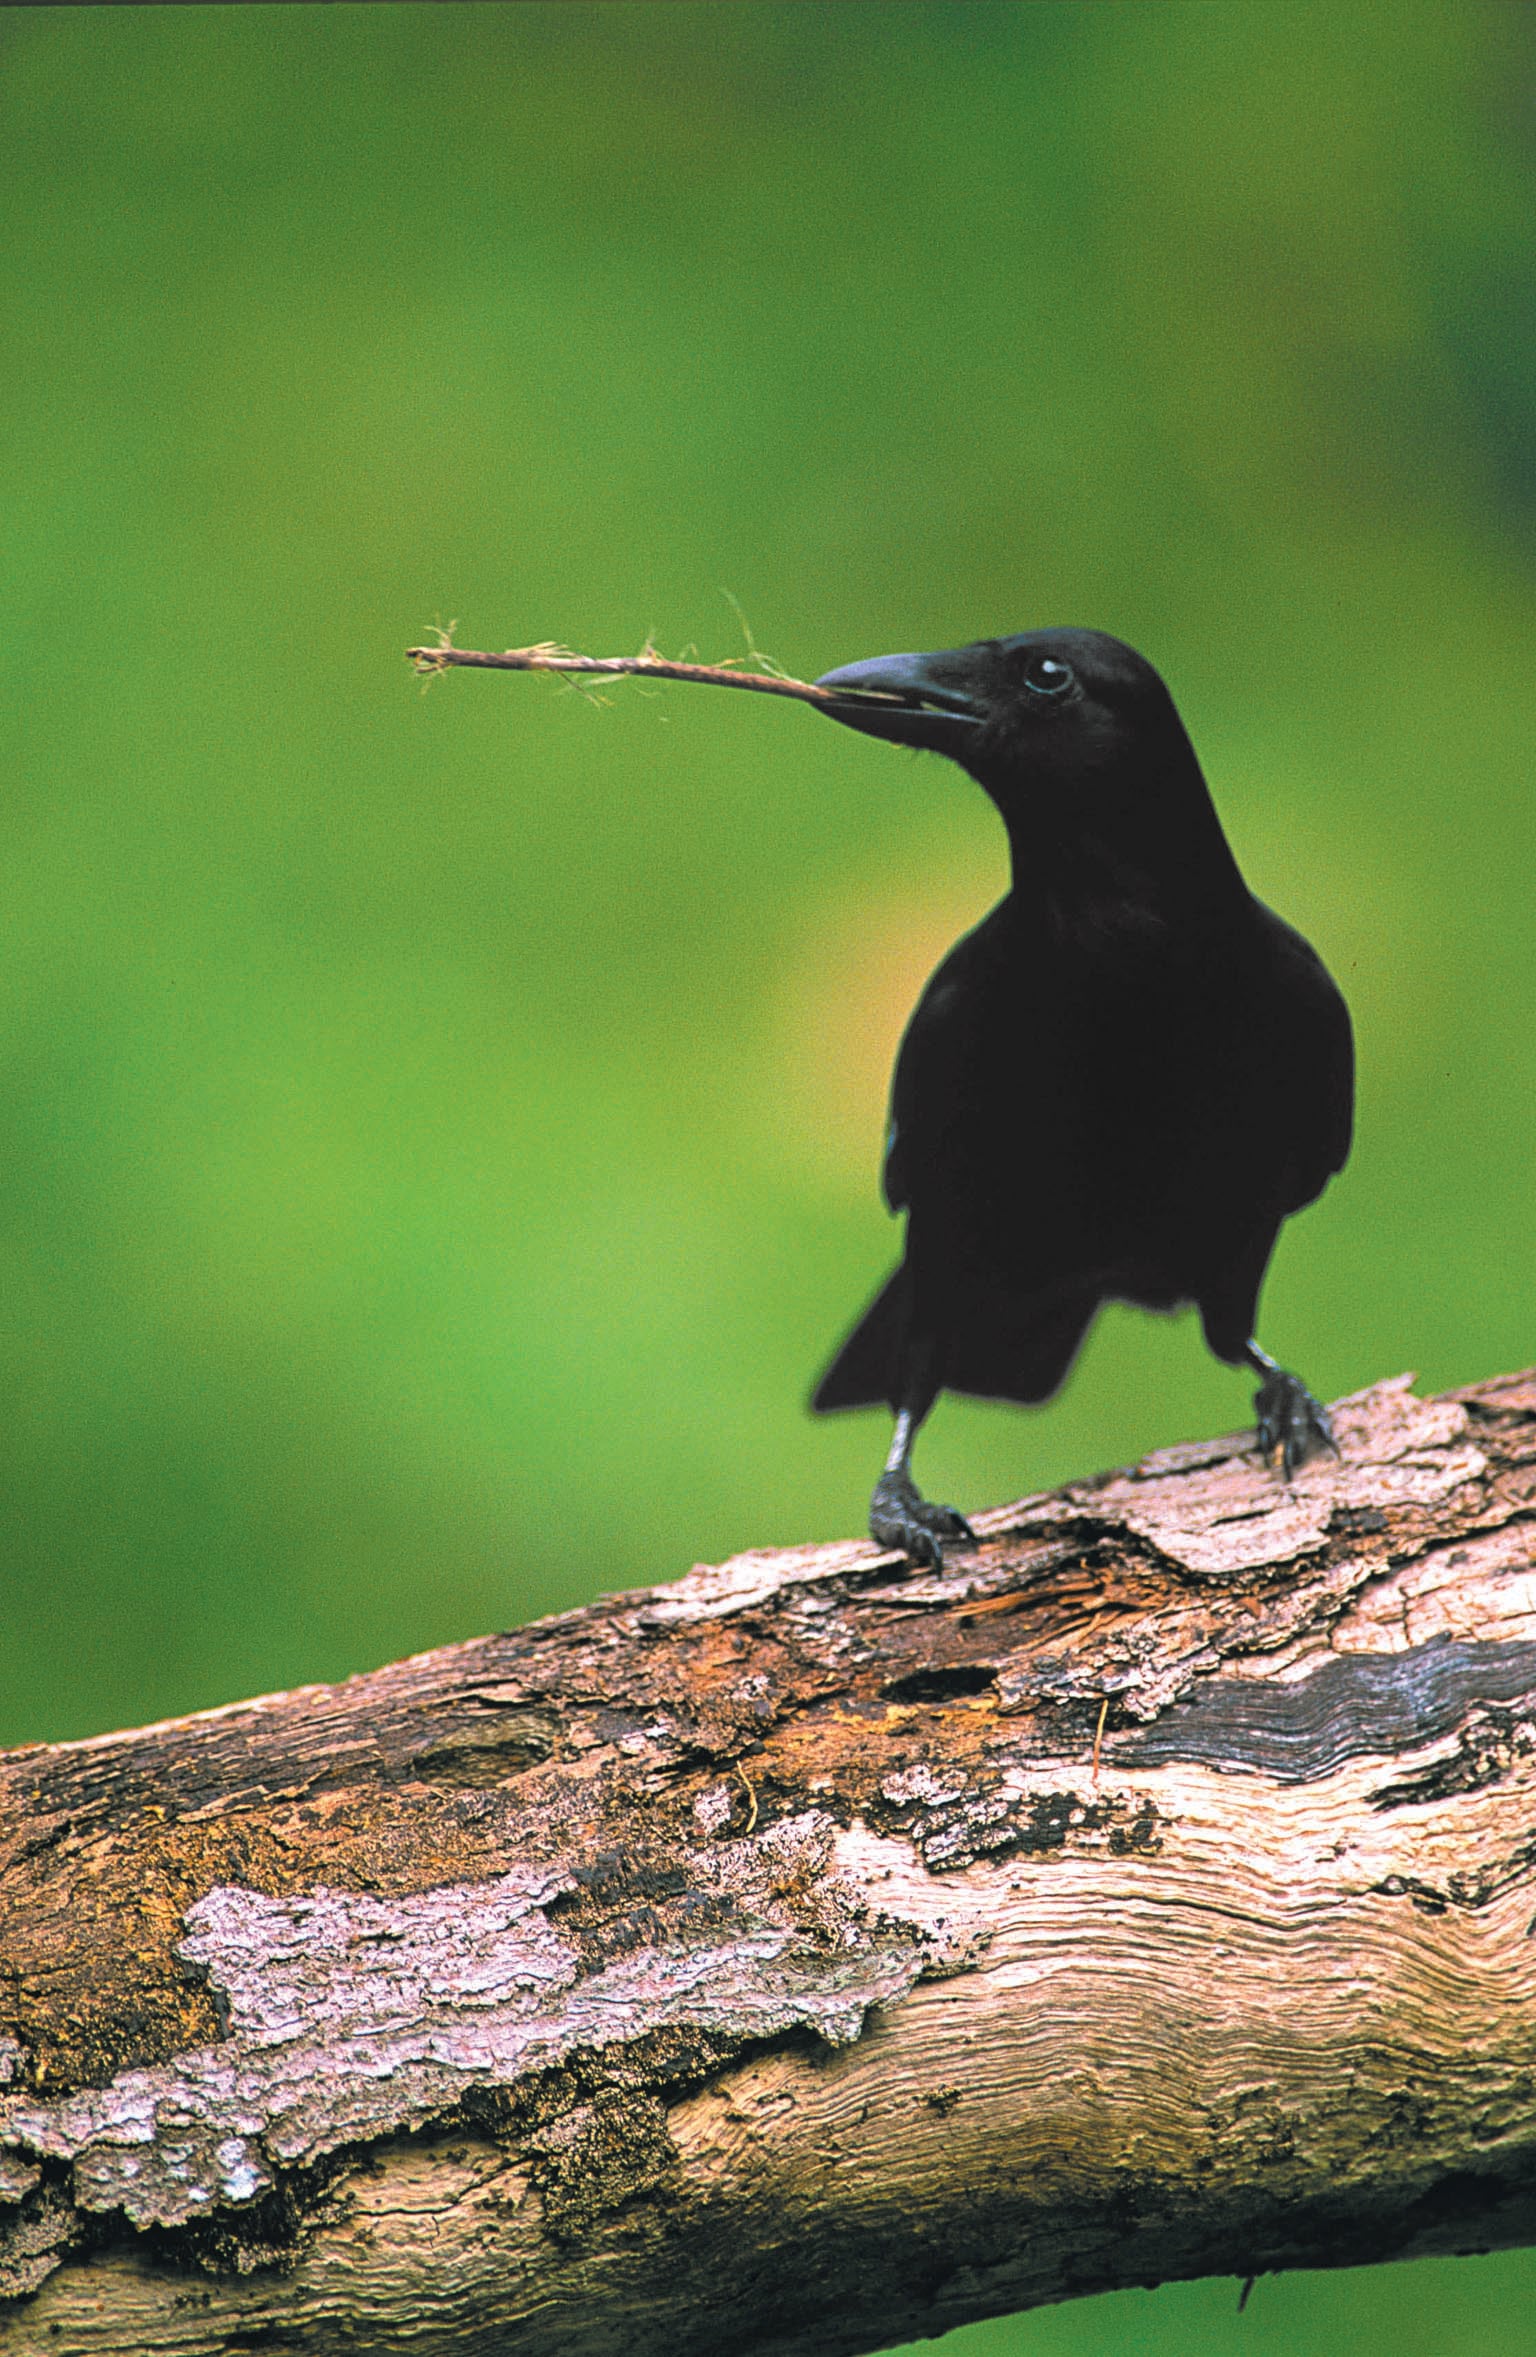 Black bird standing on a log holding stick in beak, with green background.